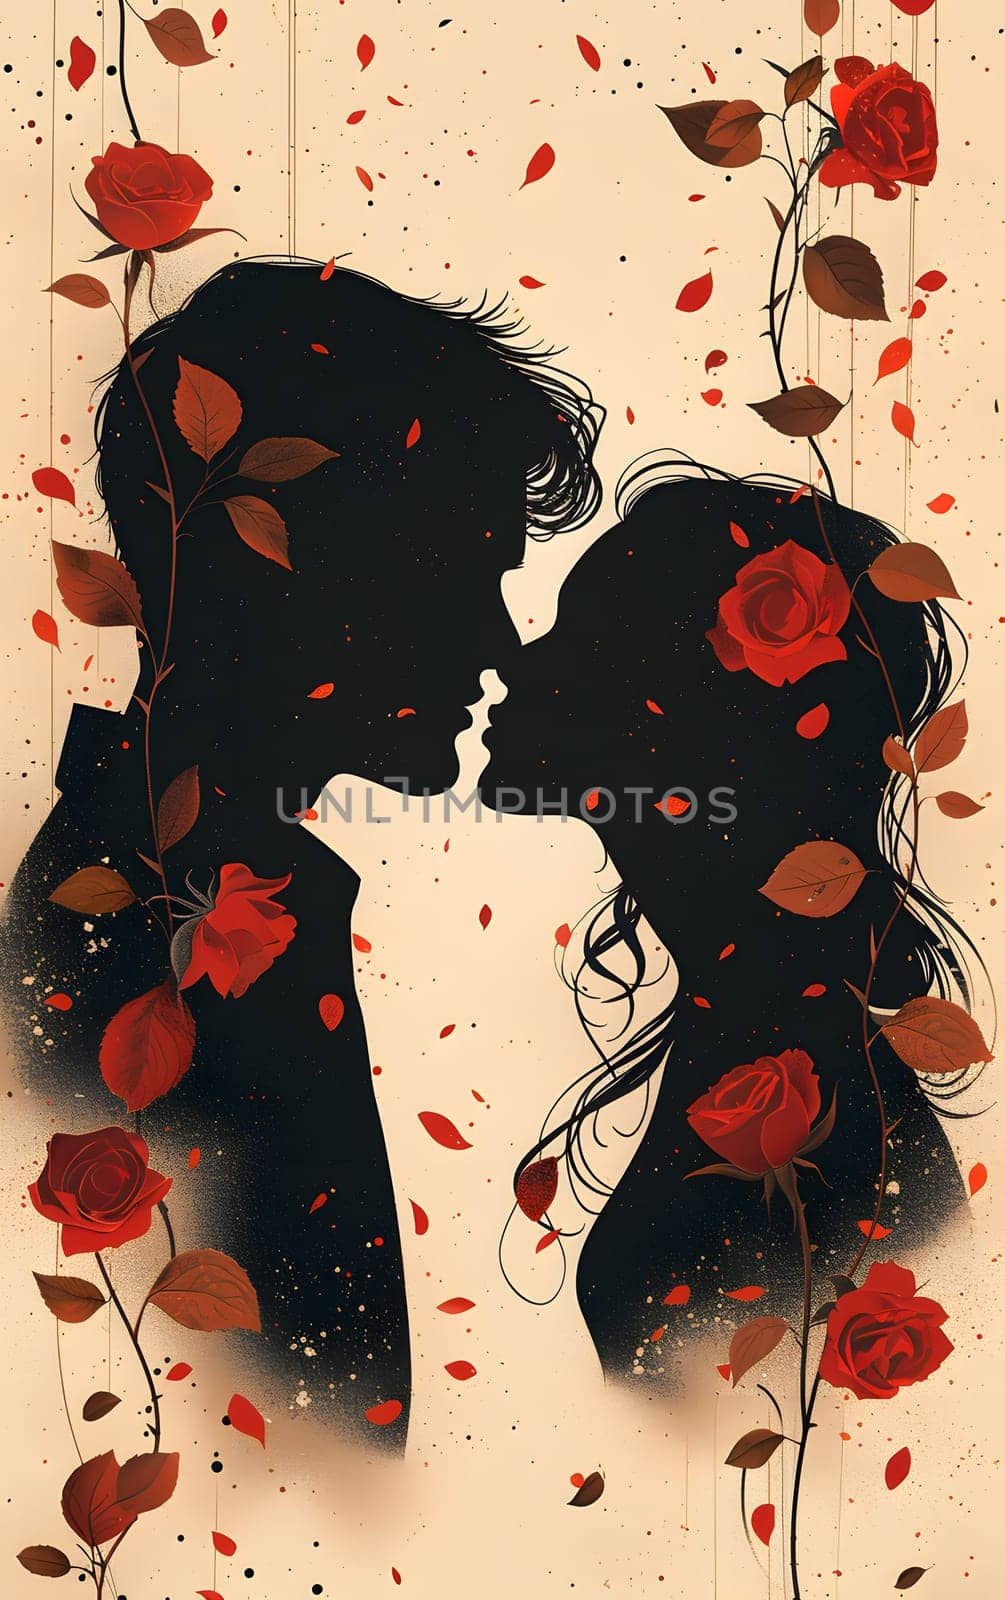 A romantic gesture captured in a painting, showcasing a silhouette of a man and a woman kissing amidst a sea of red rose petals. Visual arts at its finest, representing love and passion